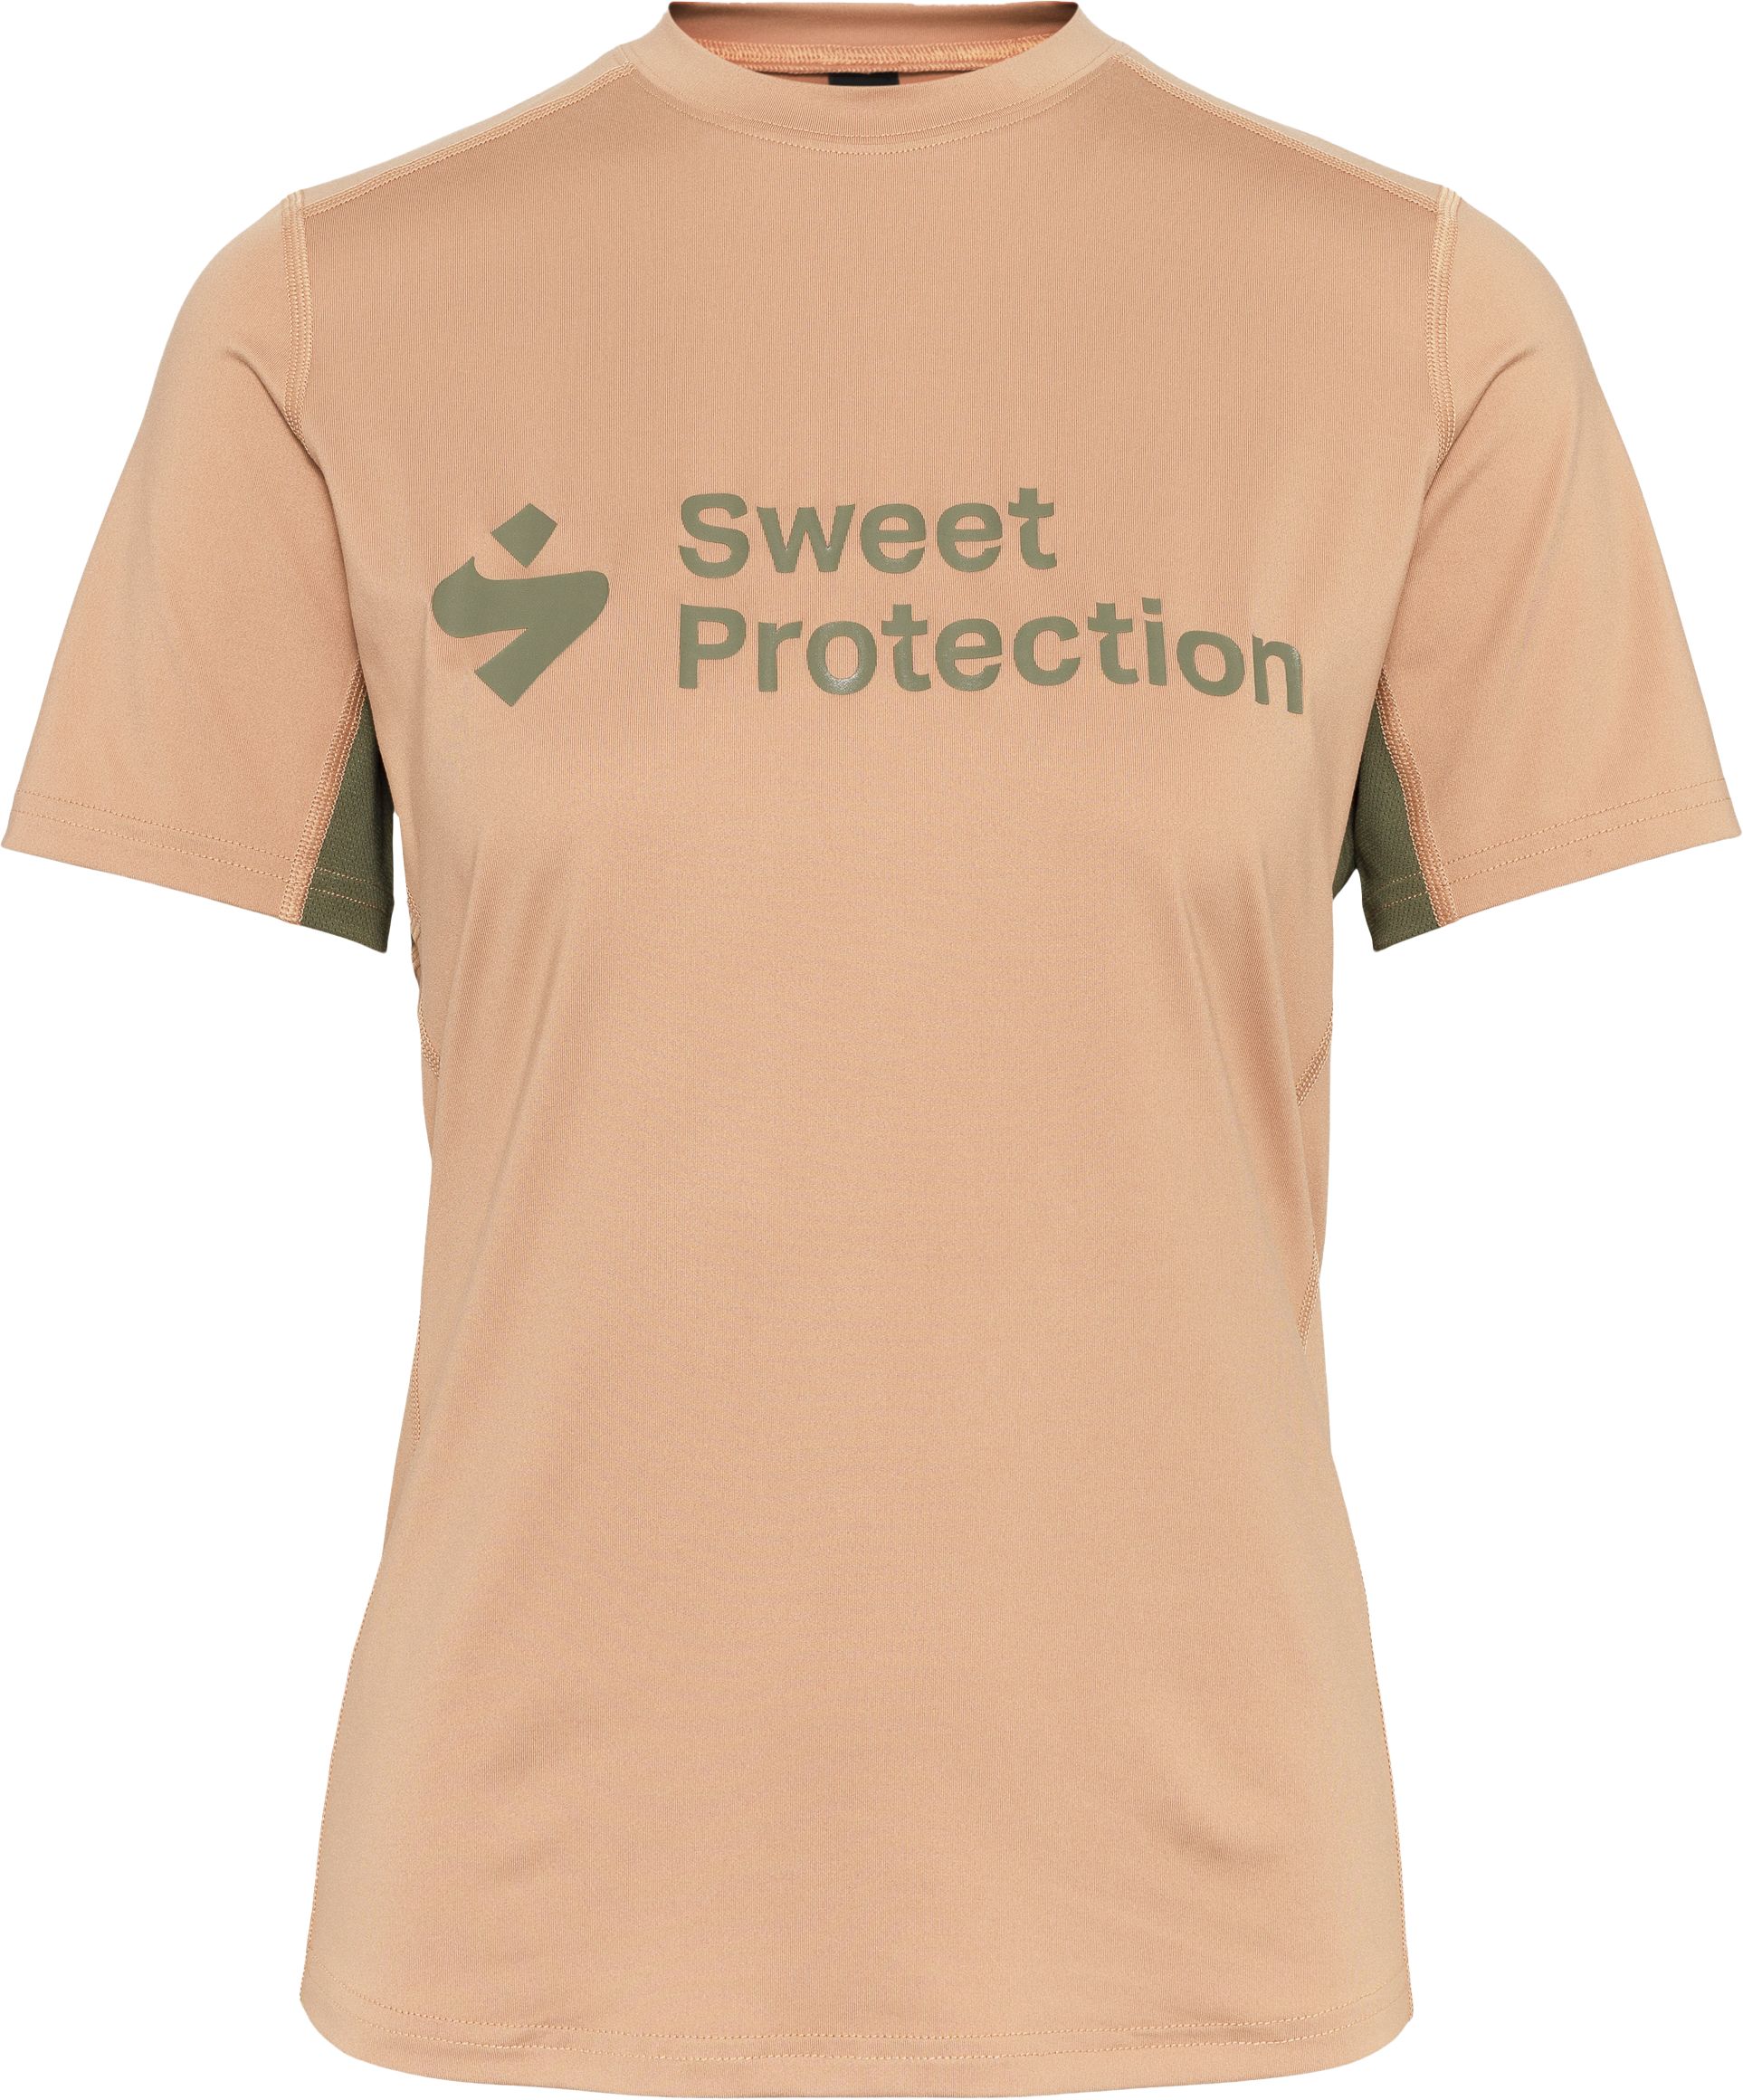 SWEET PROTECTION, Hunter SS Jersey W